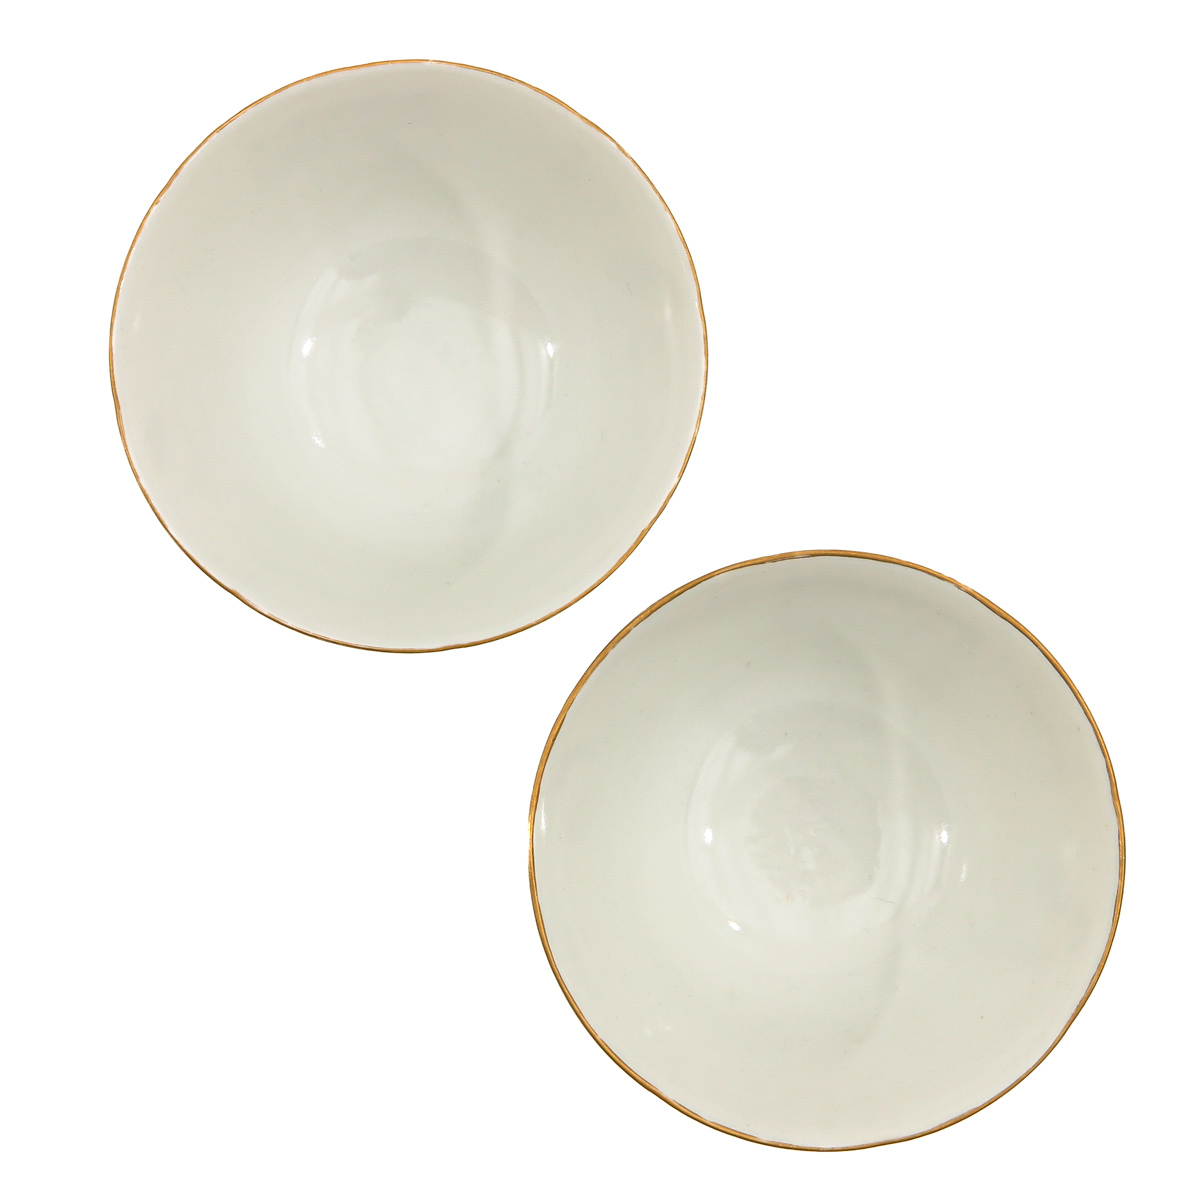 A Pair of Wu Shuang Pu Cups - Image 5 of 10